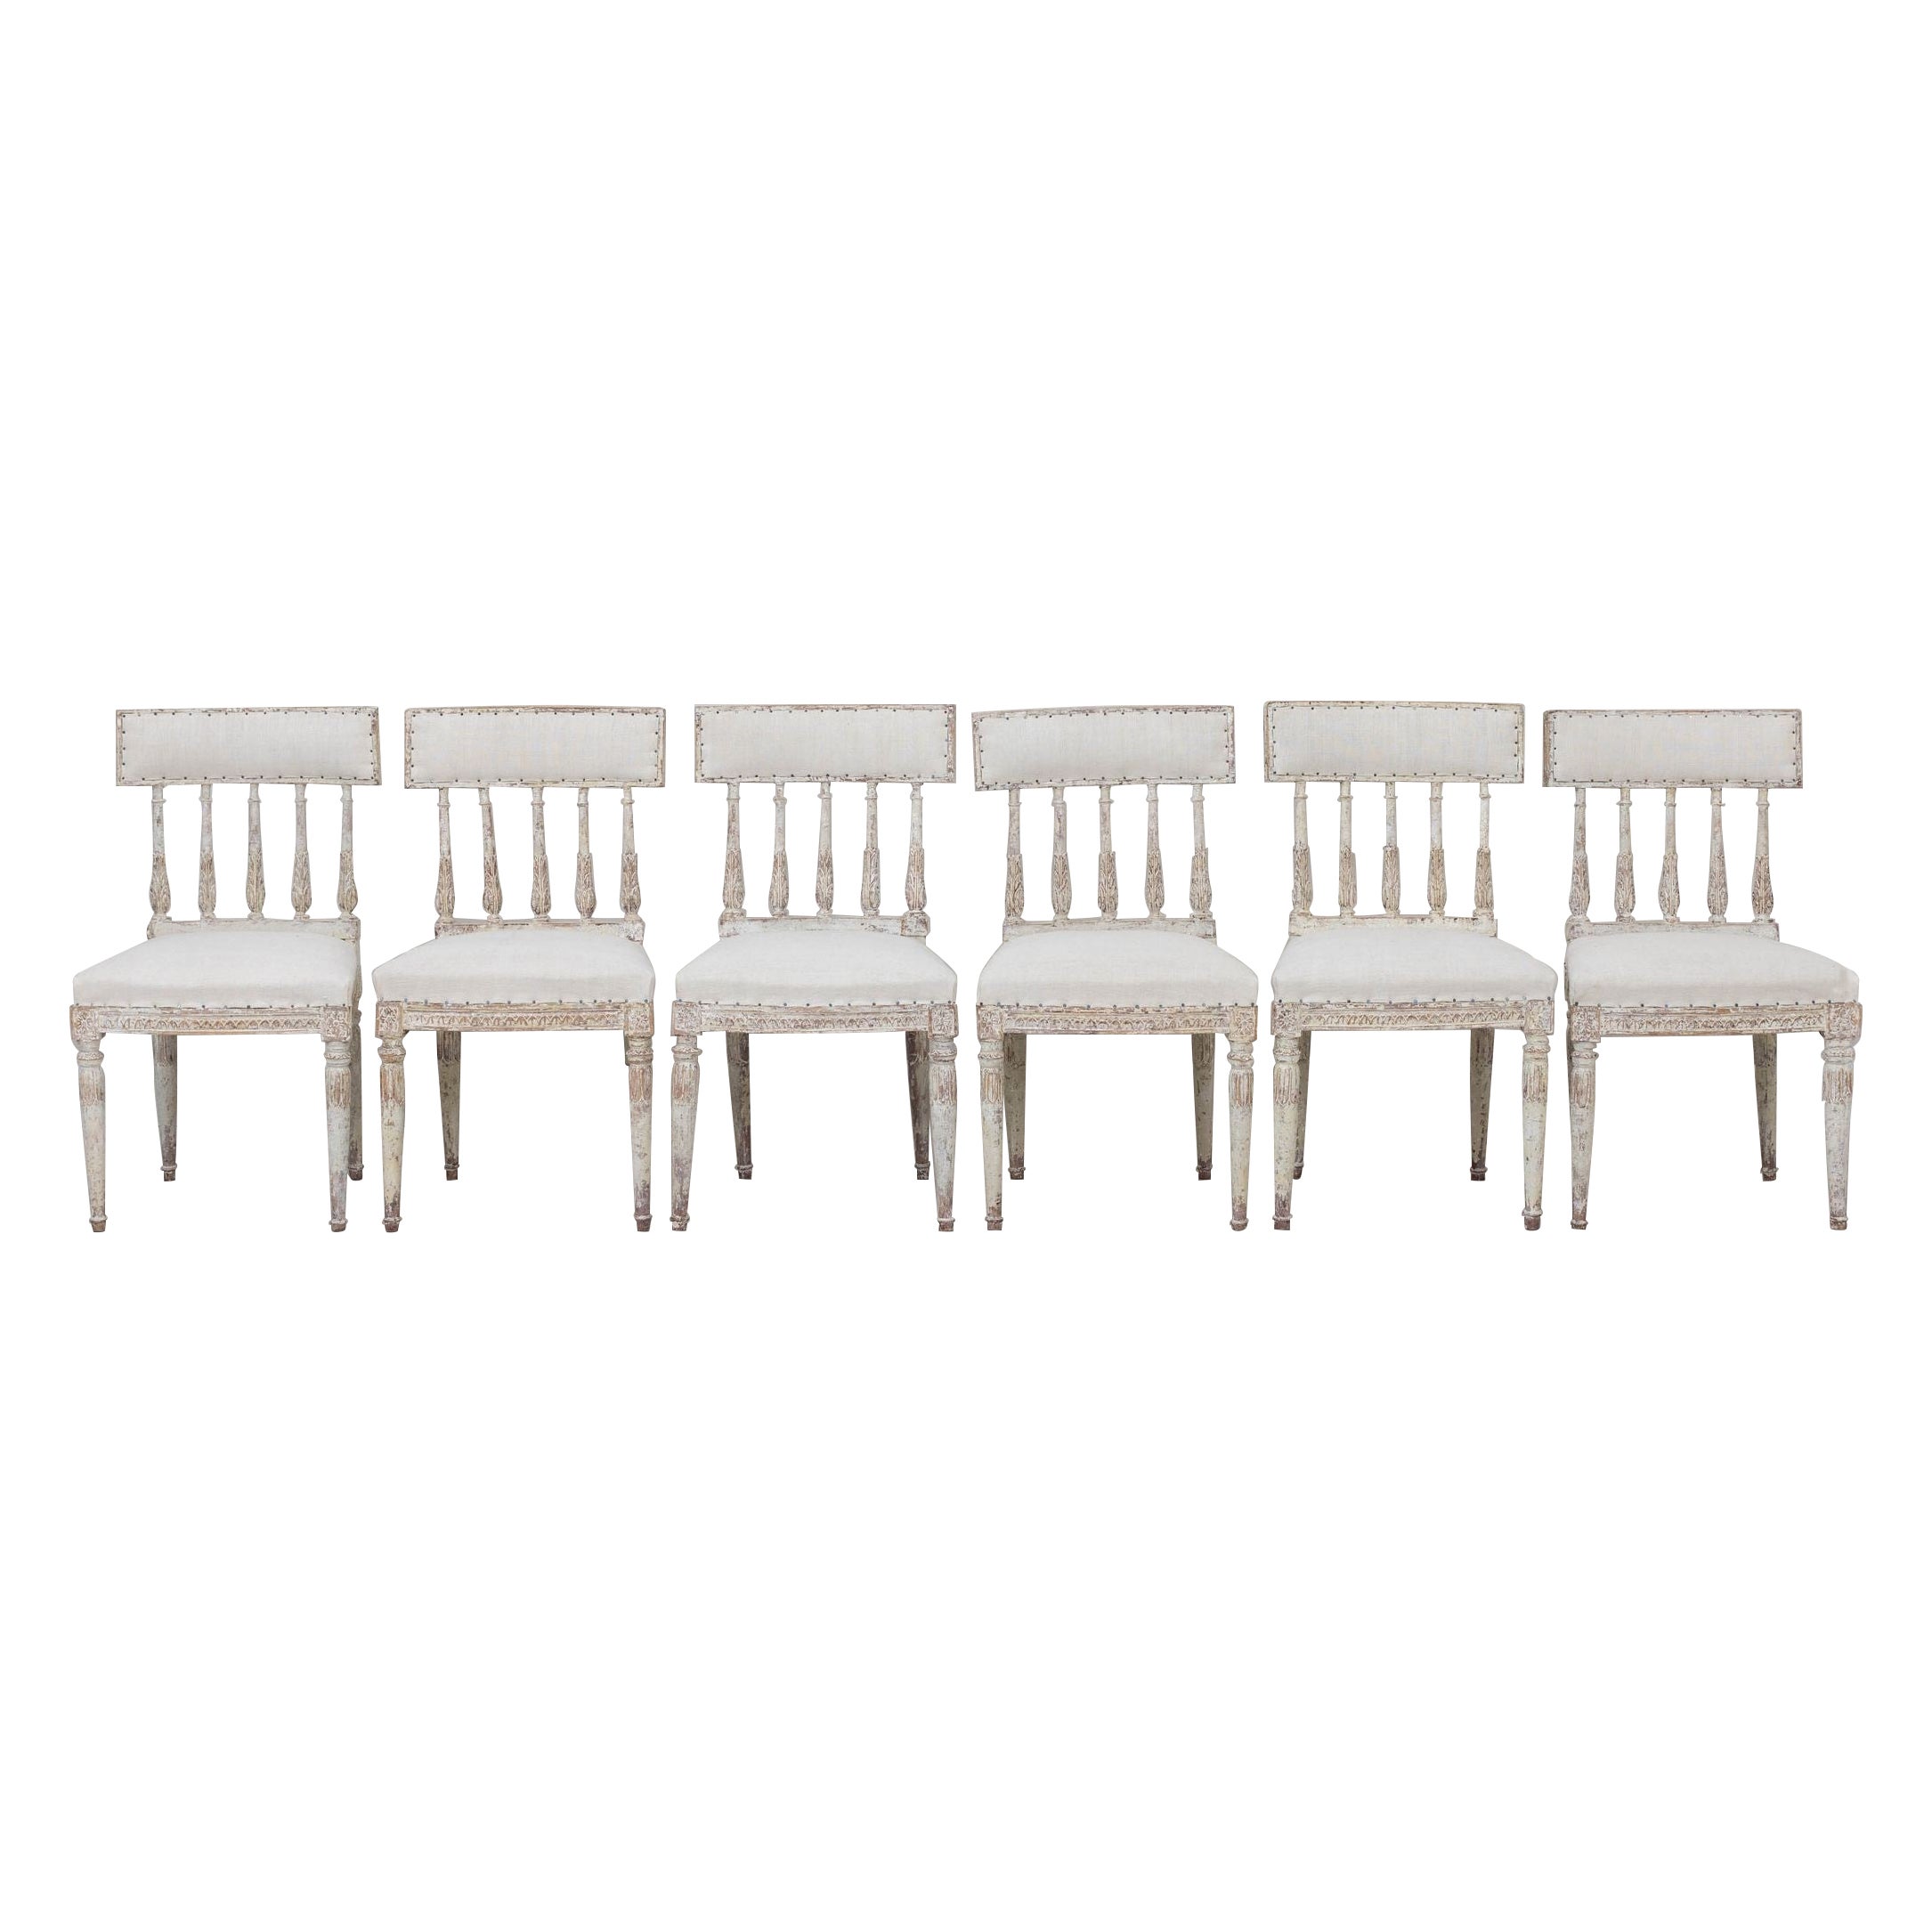 A set of six Swedish chairs from the Gustavian period in original paint, newly upholstered in antique linen. These beautiful chairs have curved splat backs, inspired by antique Roman 